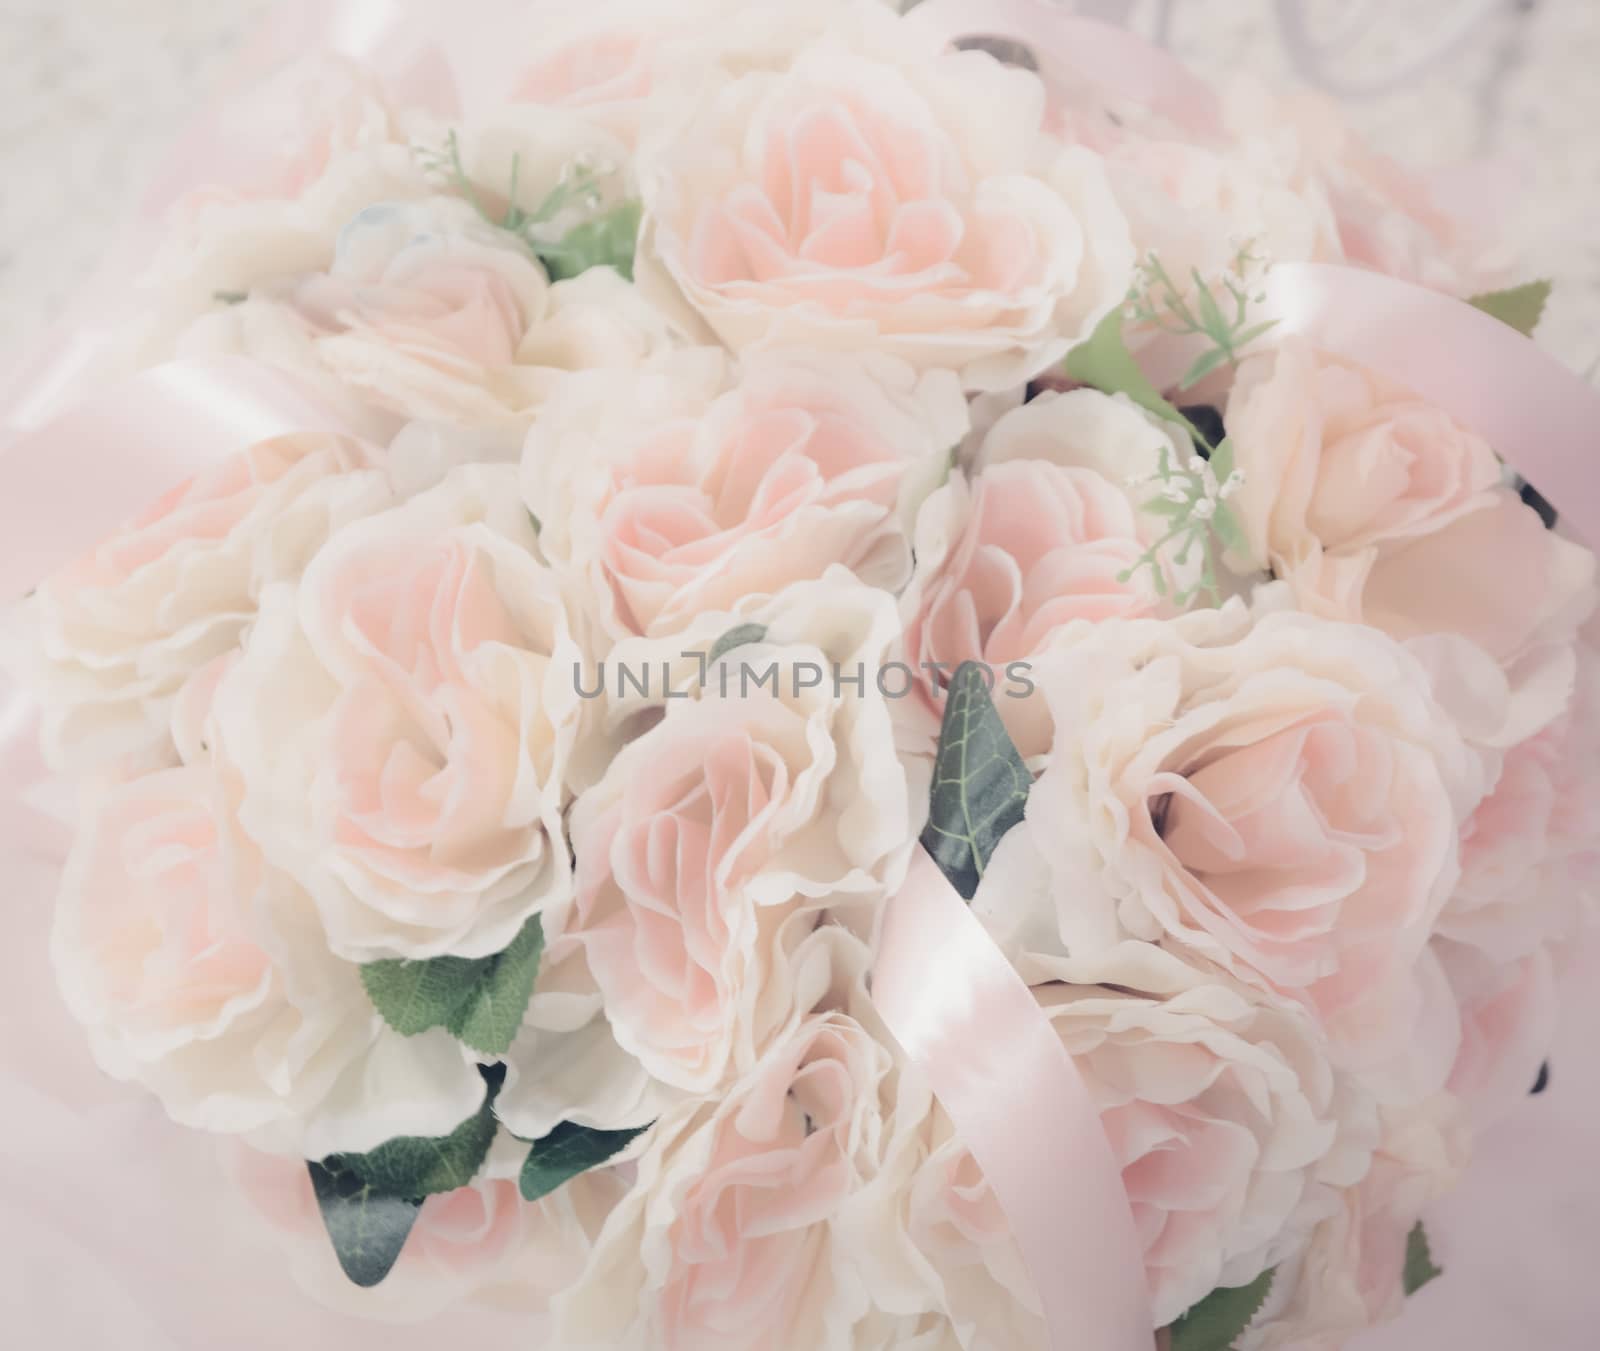 Bouquet of white roses in soft style.For art texture or web design and floral background.